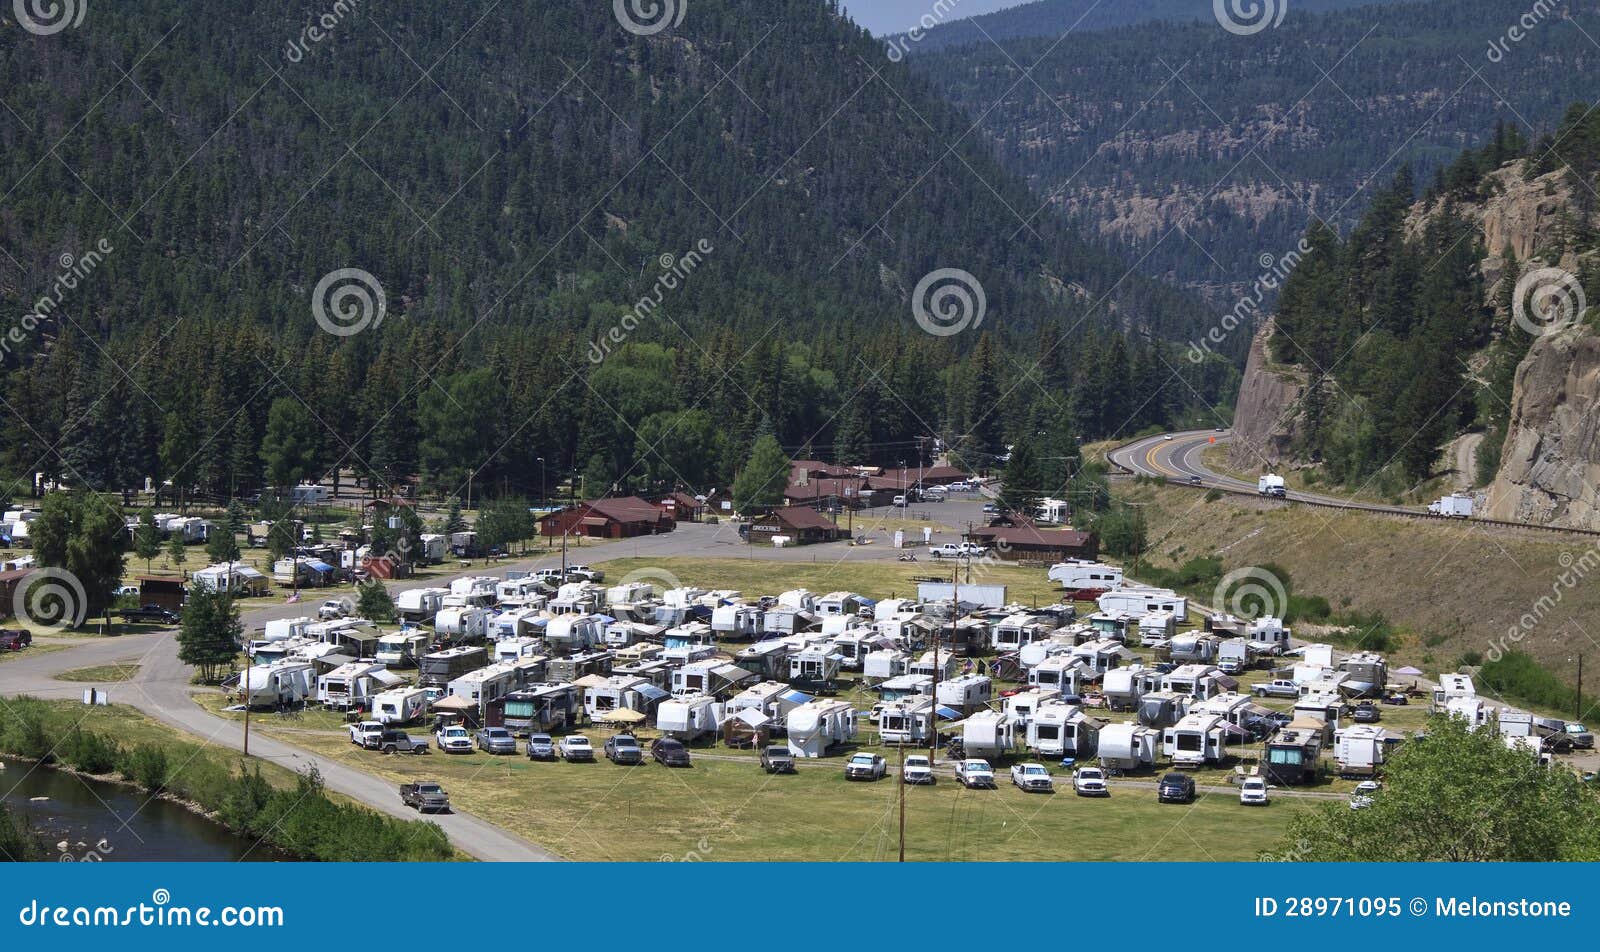 RV park stock image. Image of field, home, commercial - 28971095